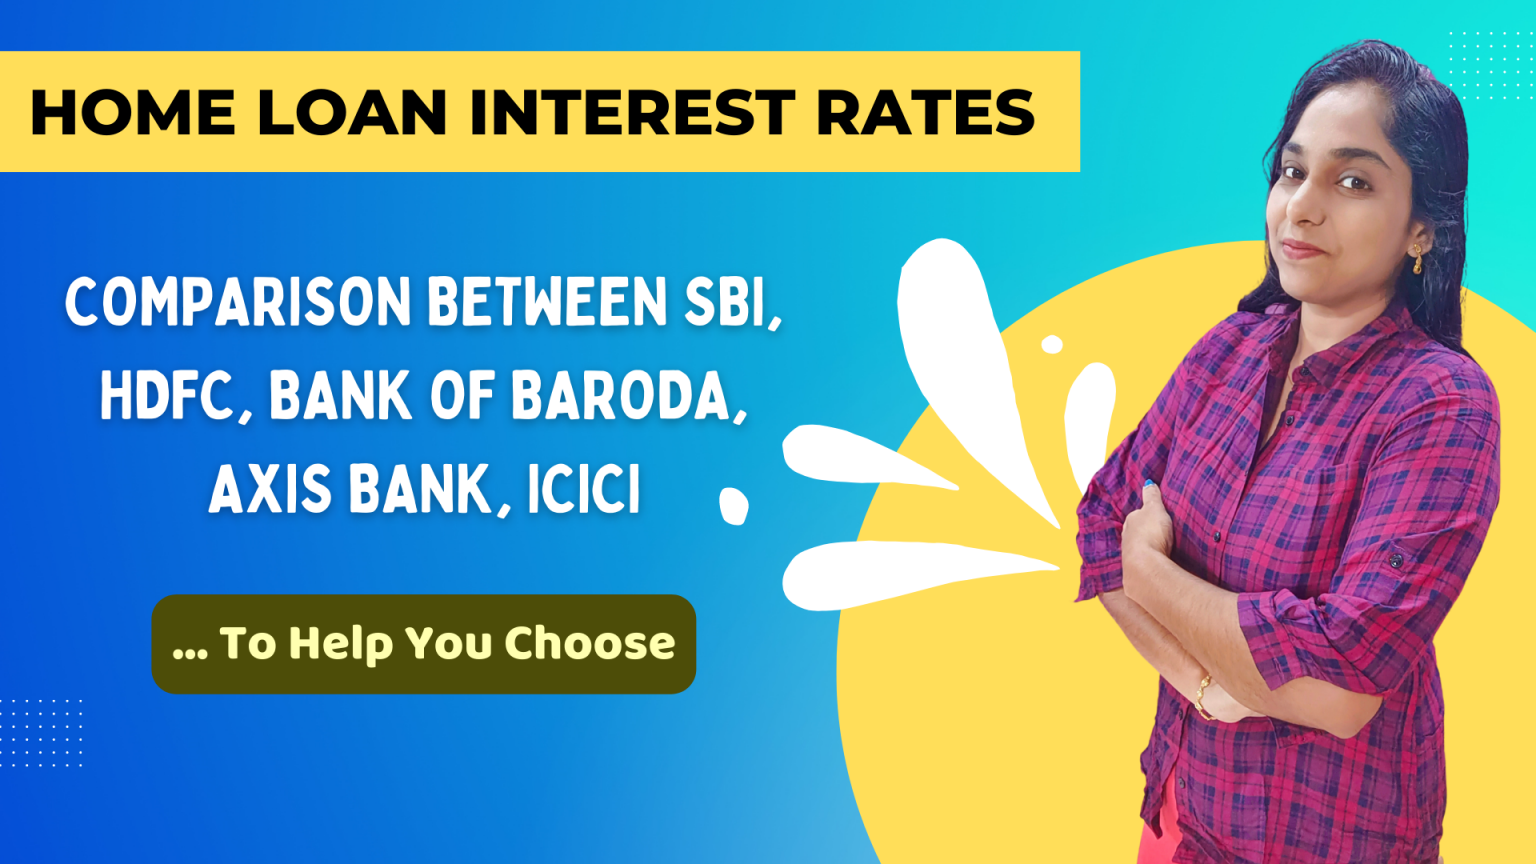 Home Loan Interest Rates Comparison Between Sbi Hdfc Bank Of Baroda Axis Bank To Help You Choose 4873